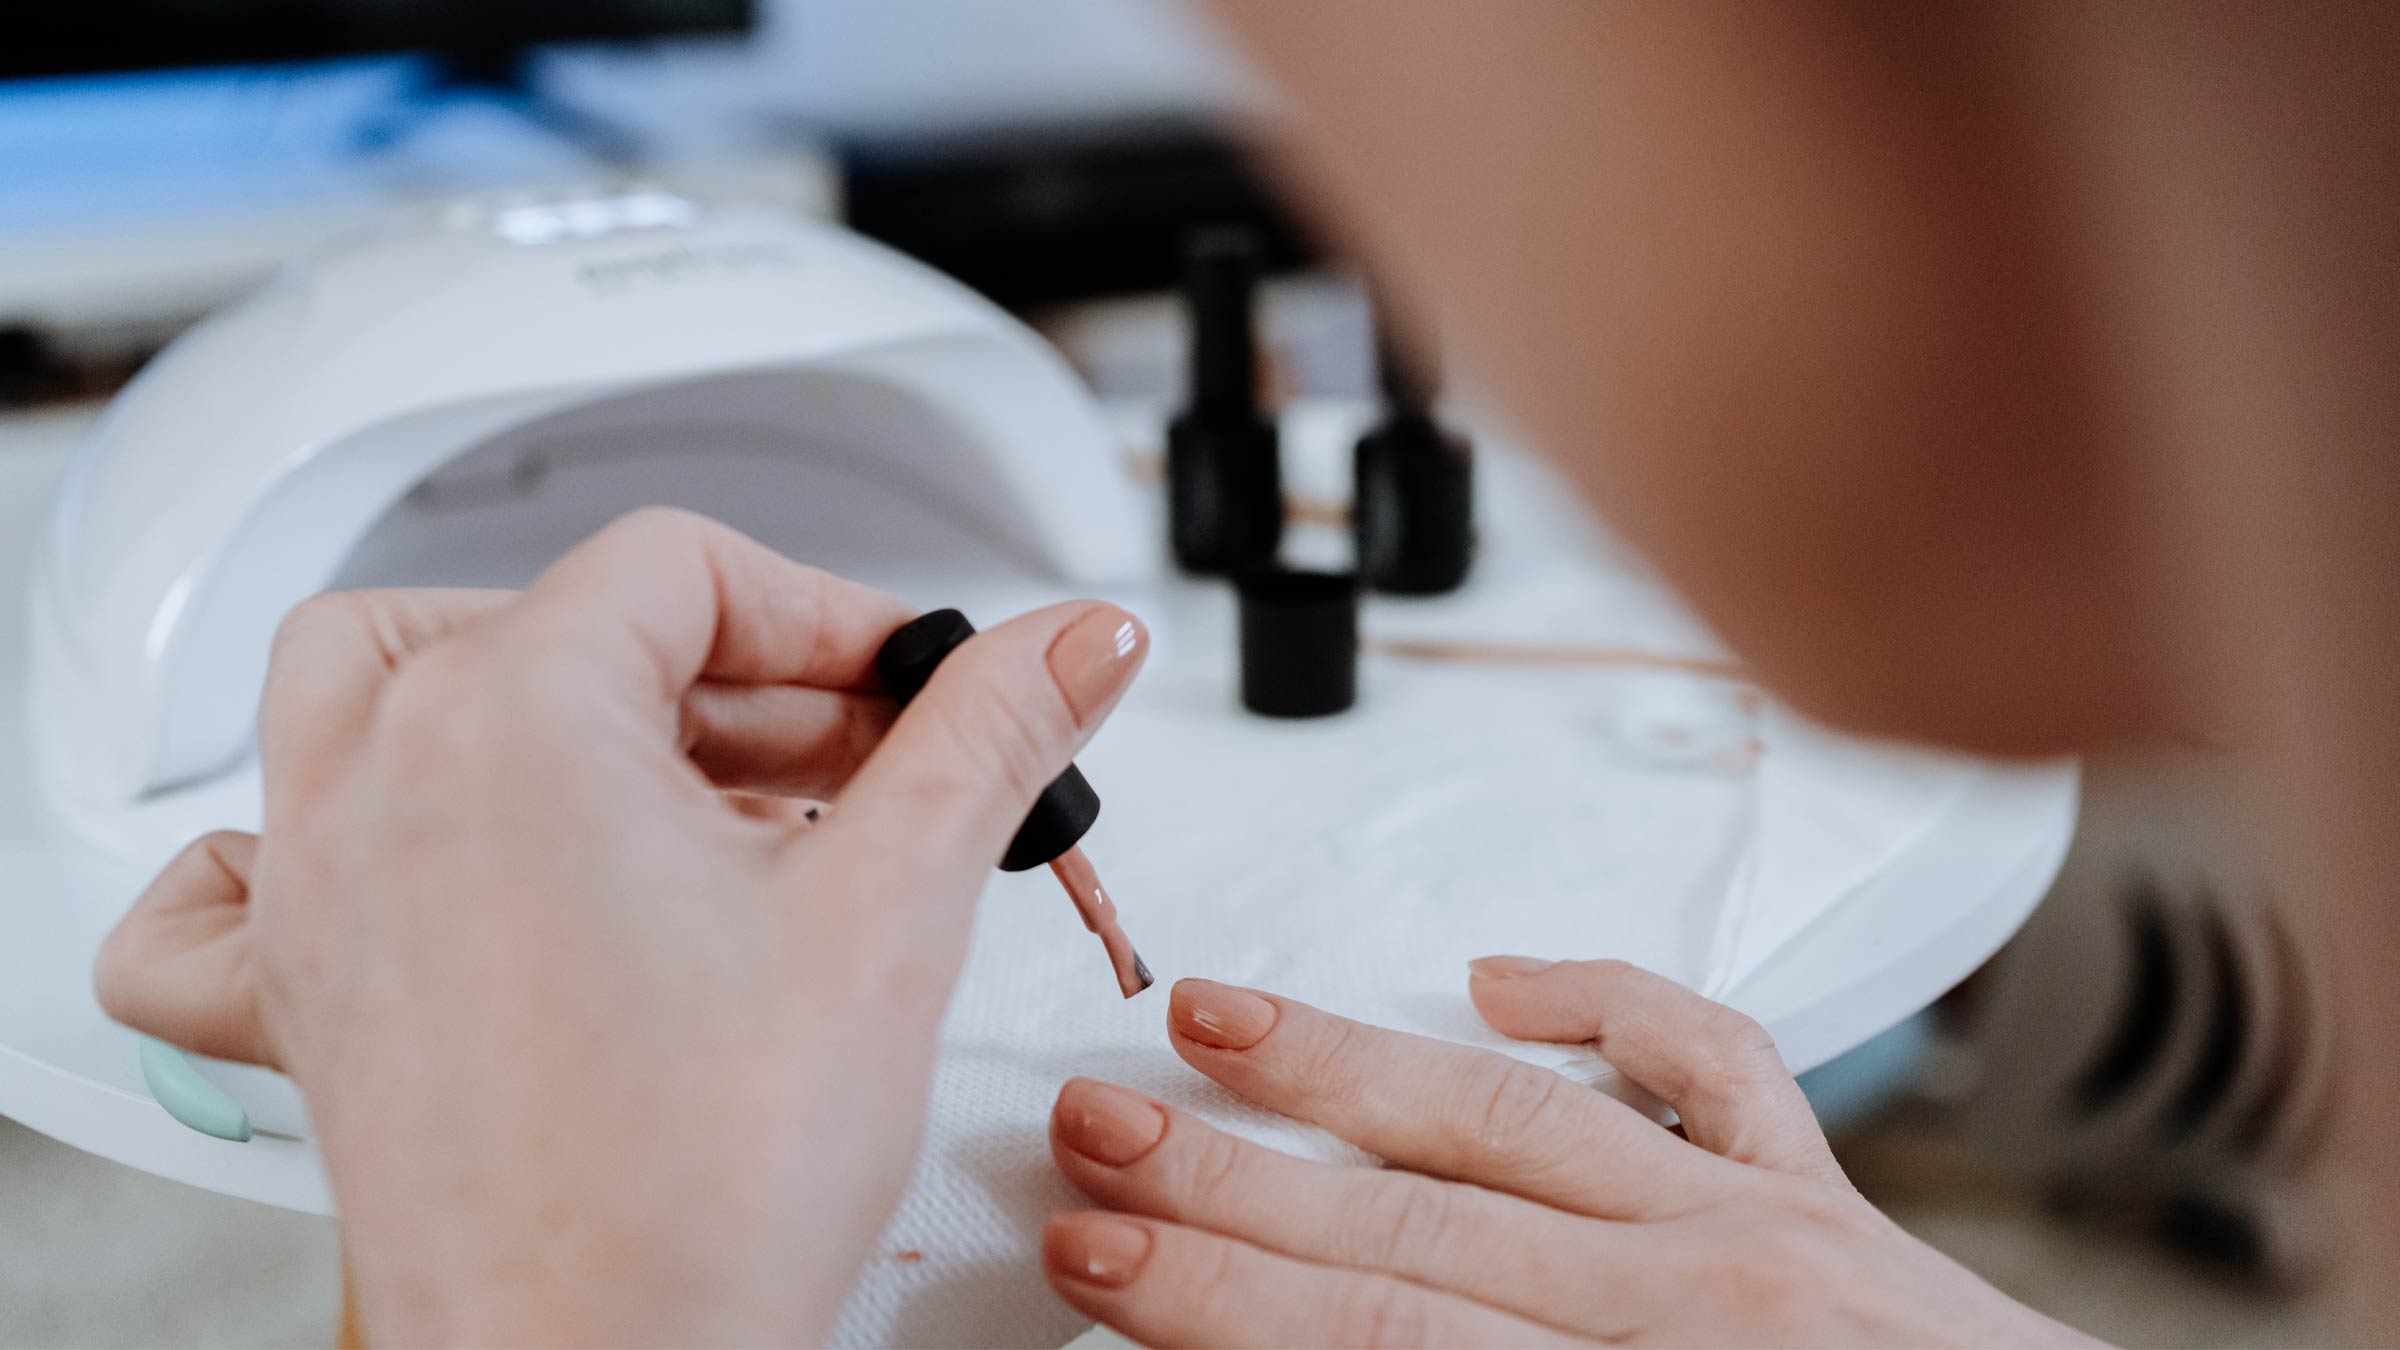 UV Lamps for Nail Gels – Facts, Science, and Common Sense | RadTech